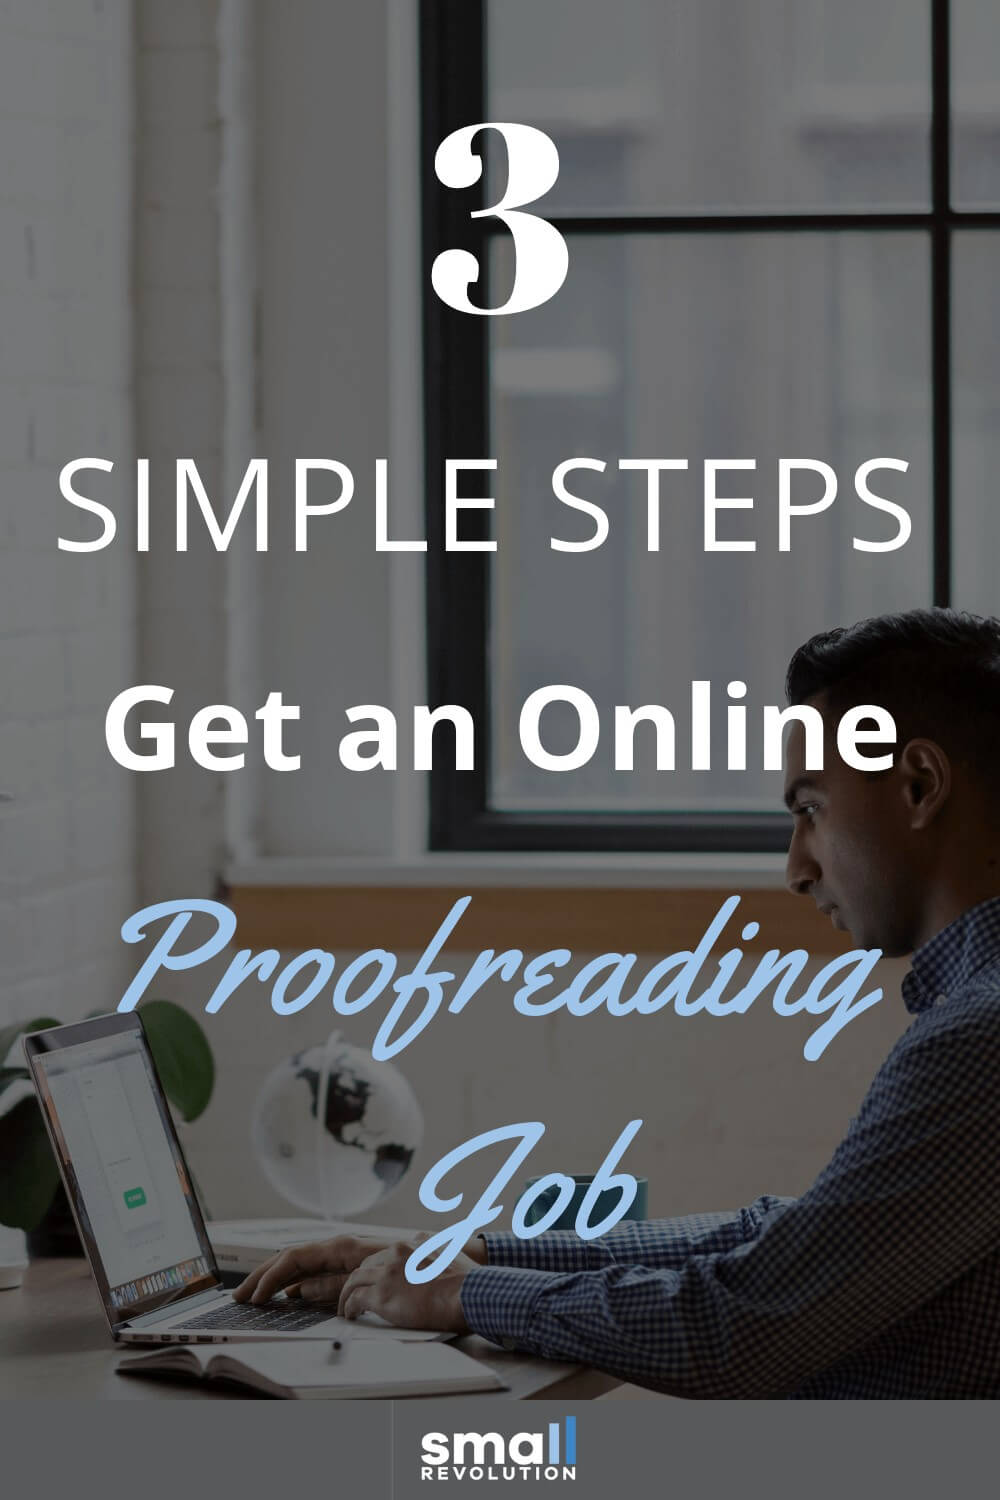 3 simple steps to get an online proofreading job